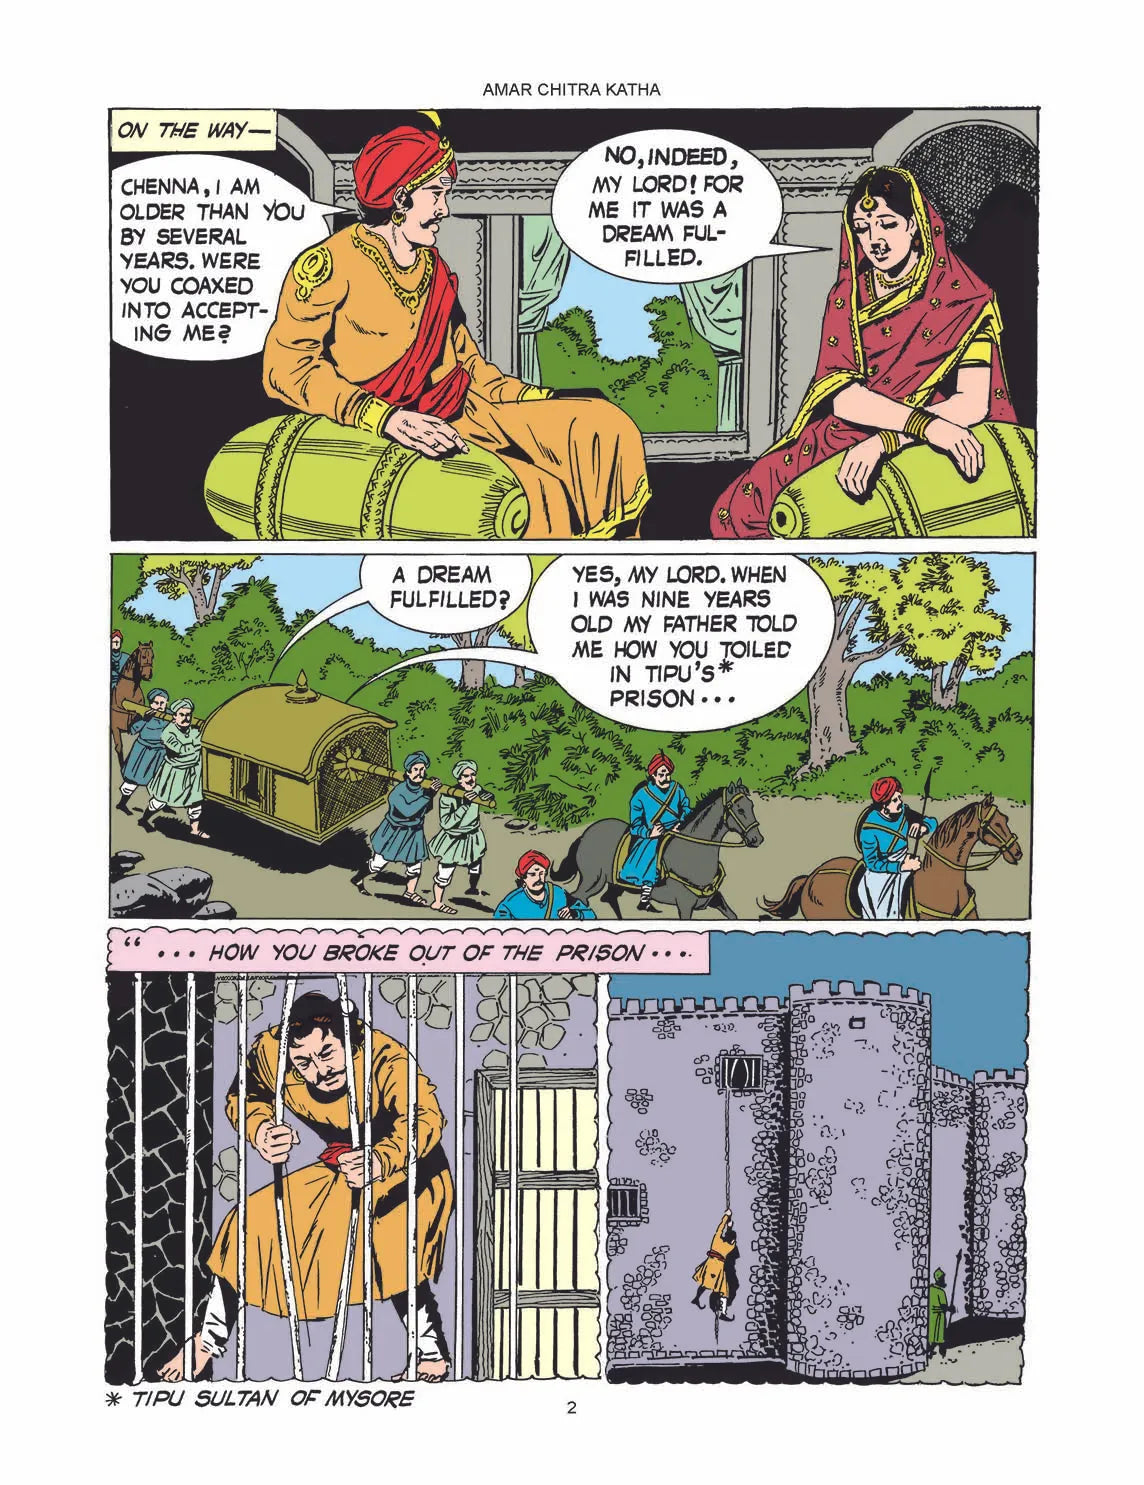 Amar Chitra Katha - Brave Women Of India 5 in 1